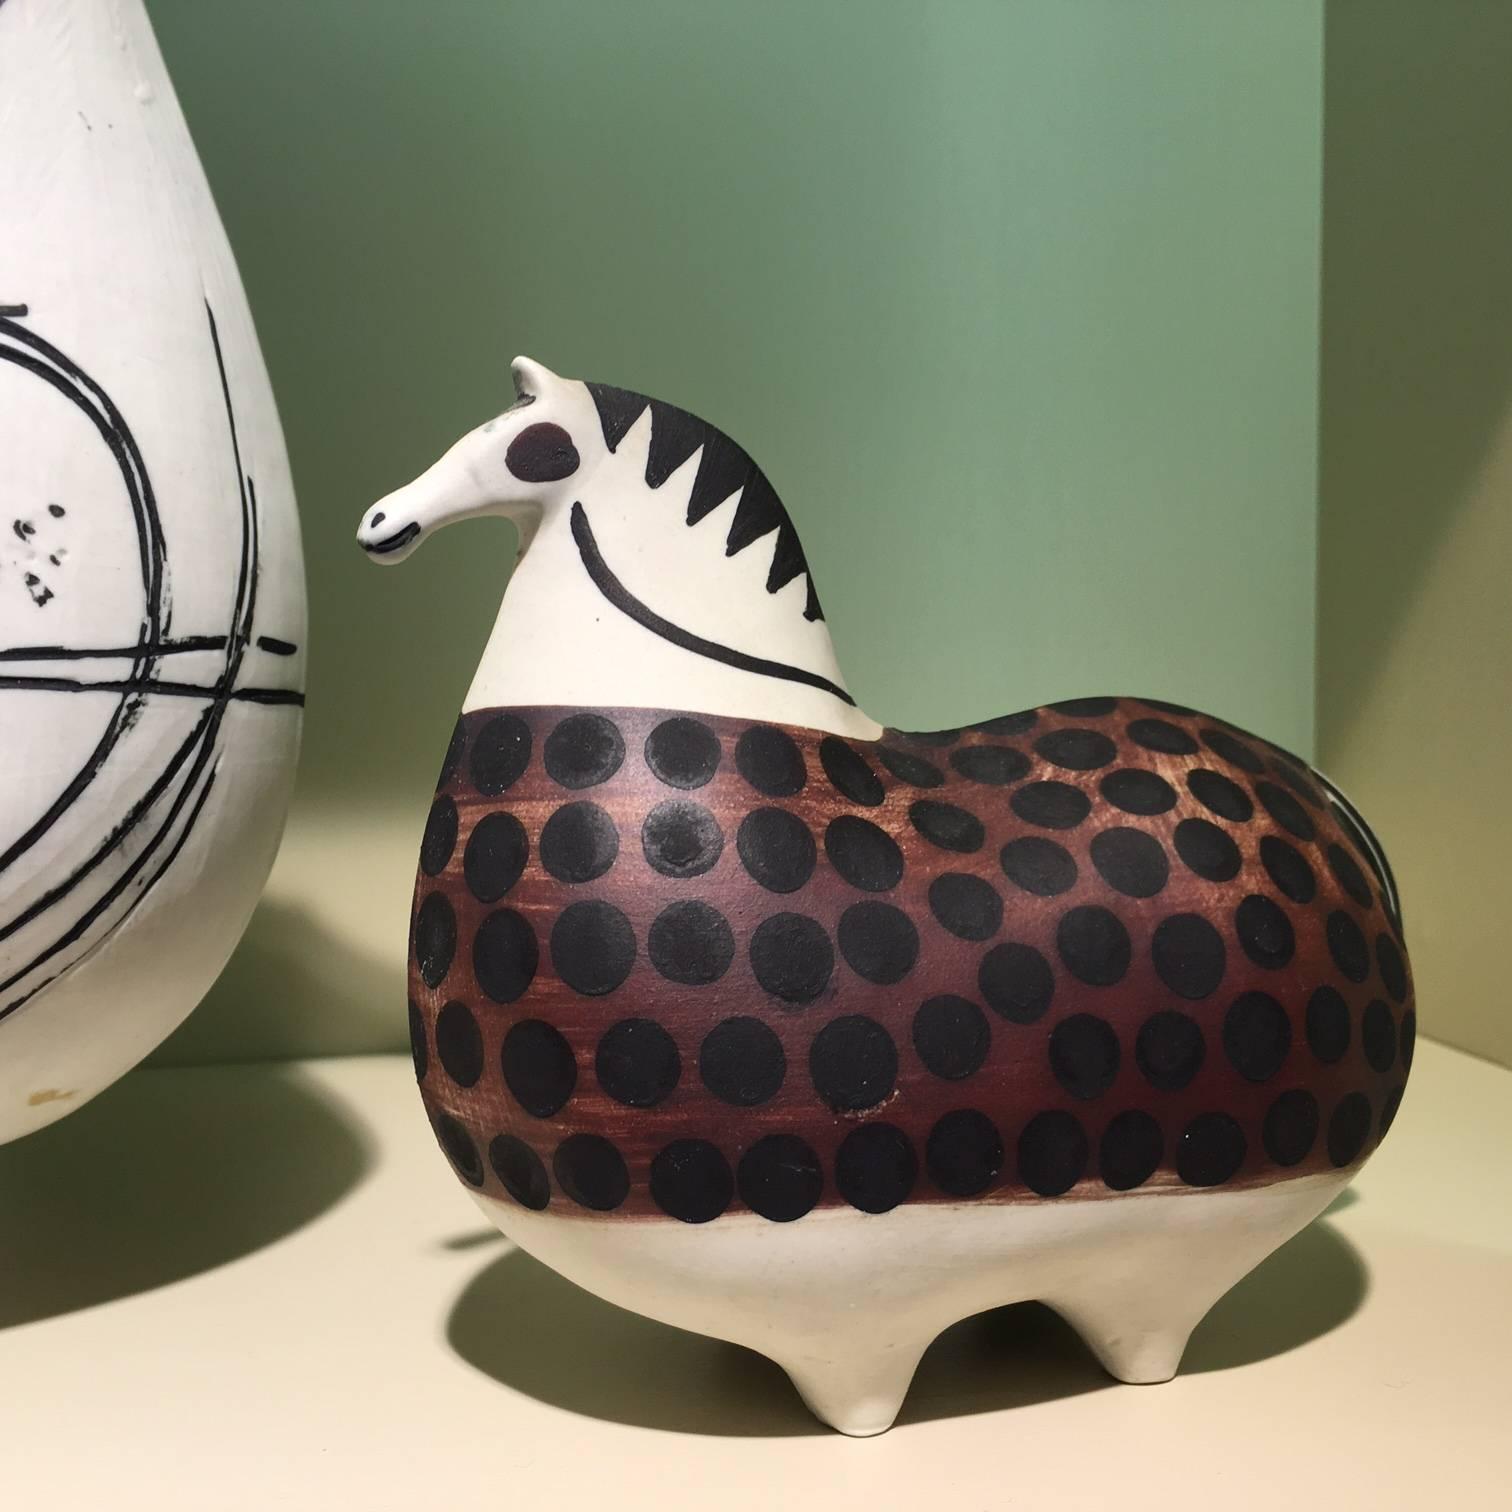 One large and two smaller stoneware horses, signed pieces. The three horses are among Stig Lindberg's most iconic works. Literature: Tusenkonstnären Stig Lindberg by Gisela Eronn, Page 82.